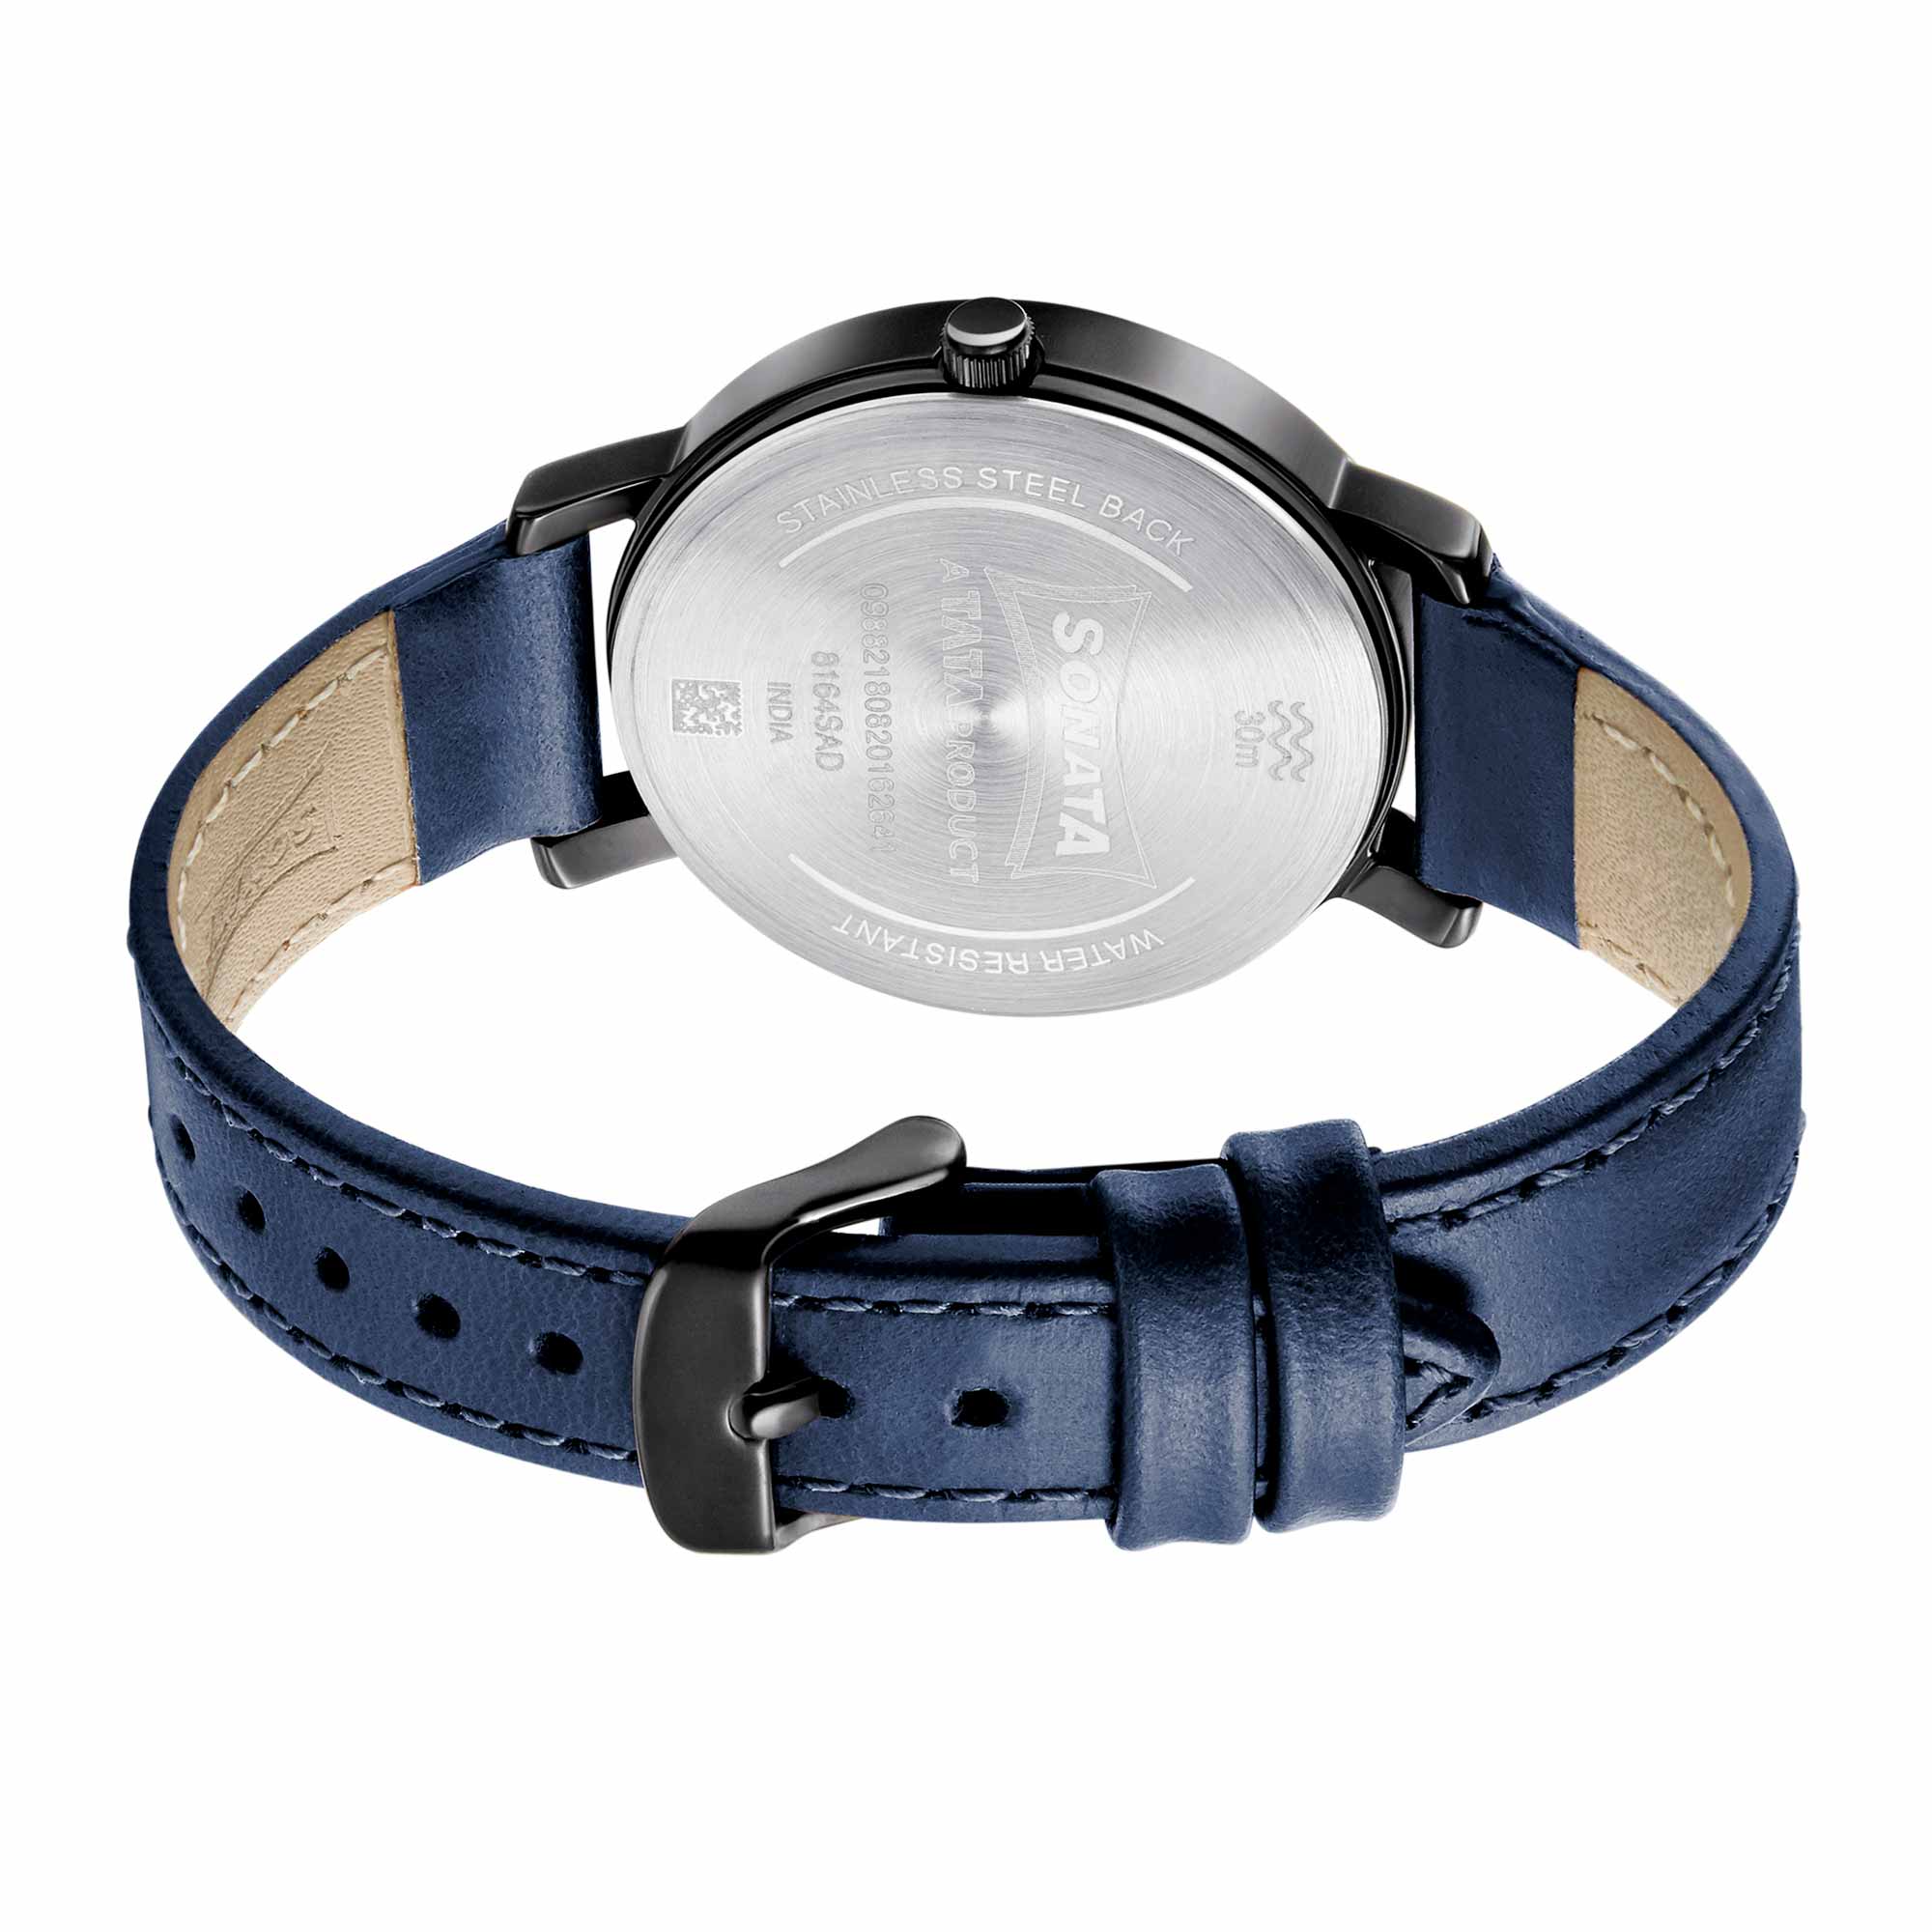 Sonata Multifunctions Blue Dial Women Watch With Leather Strap